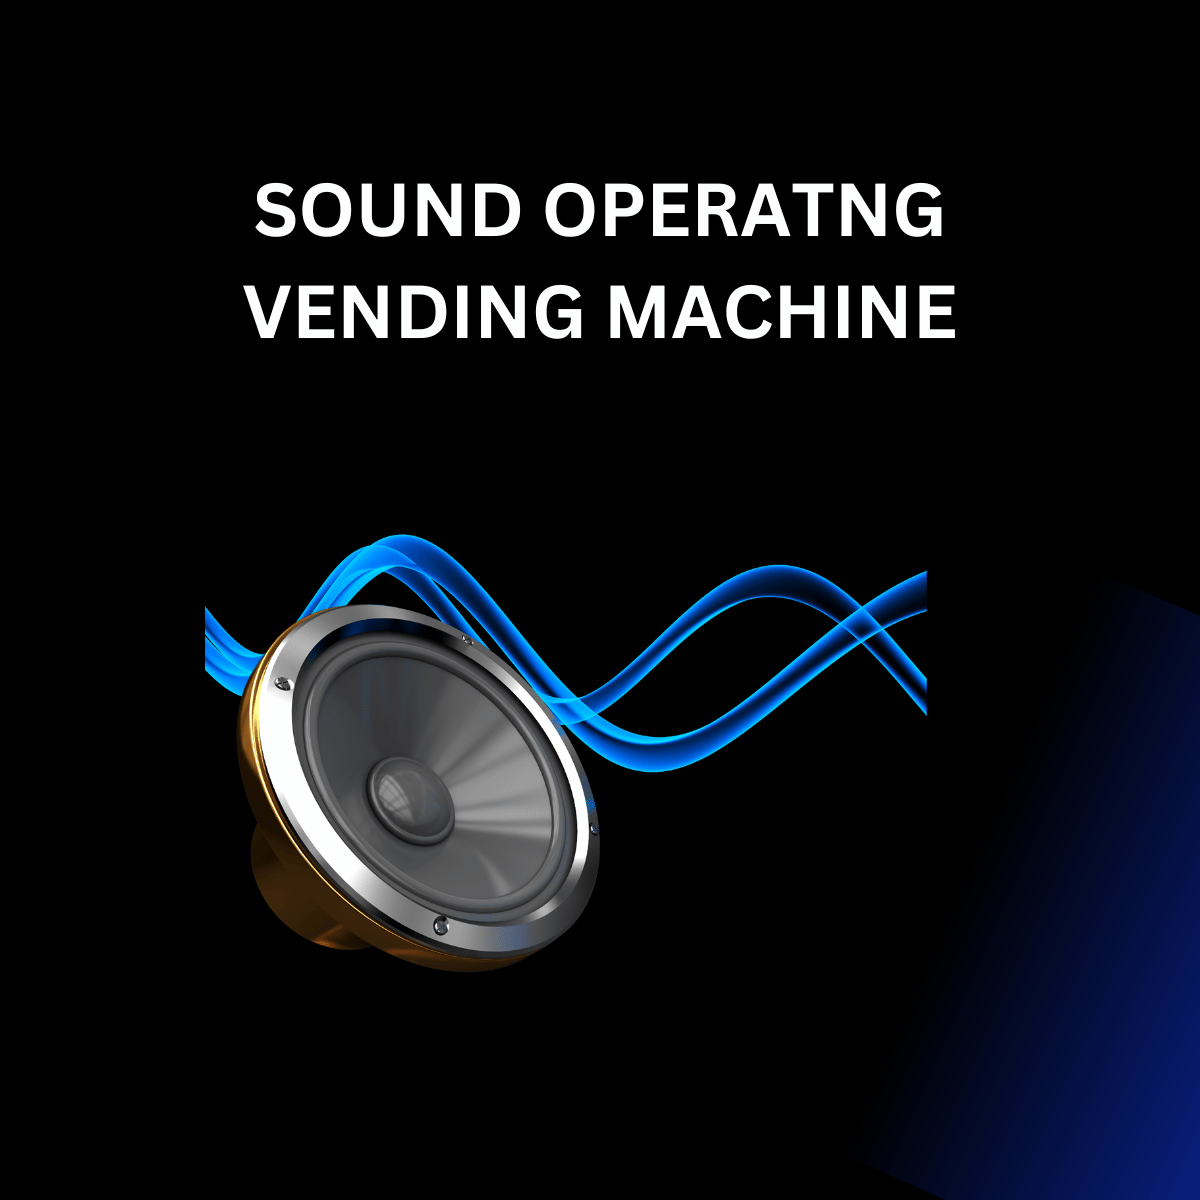 WHAT IF YOU COULD VEND A SOUND?